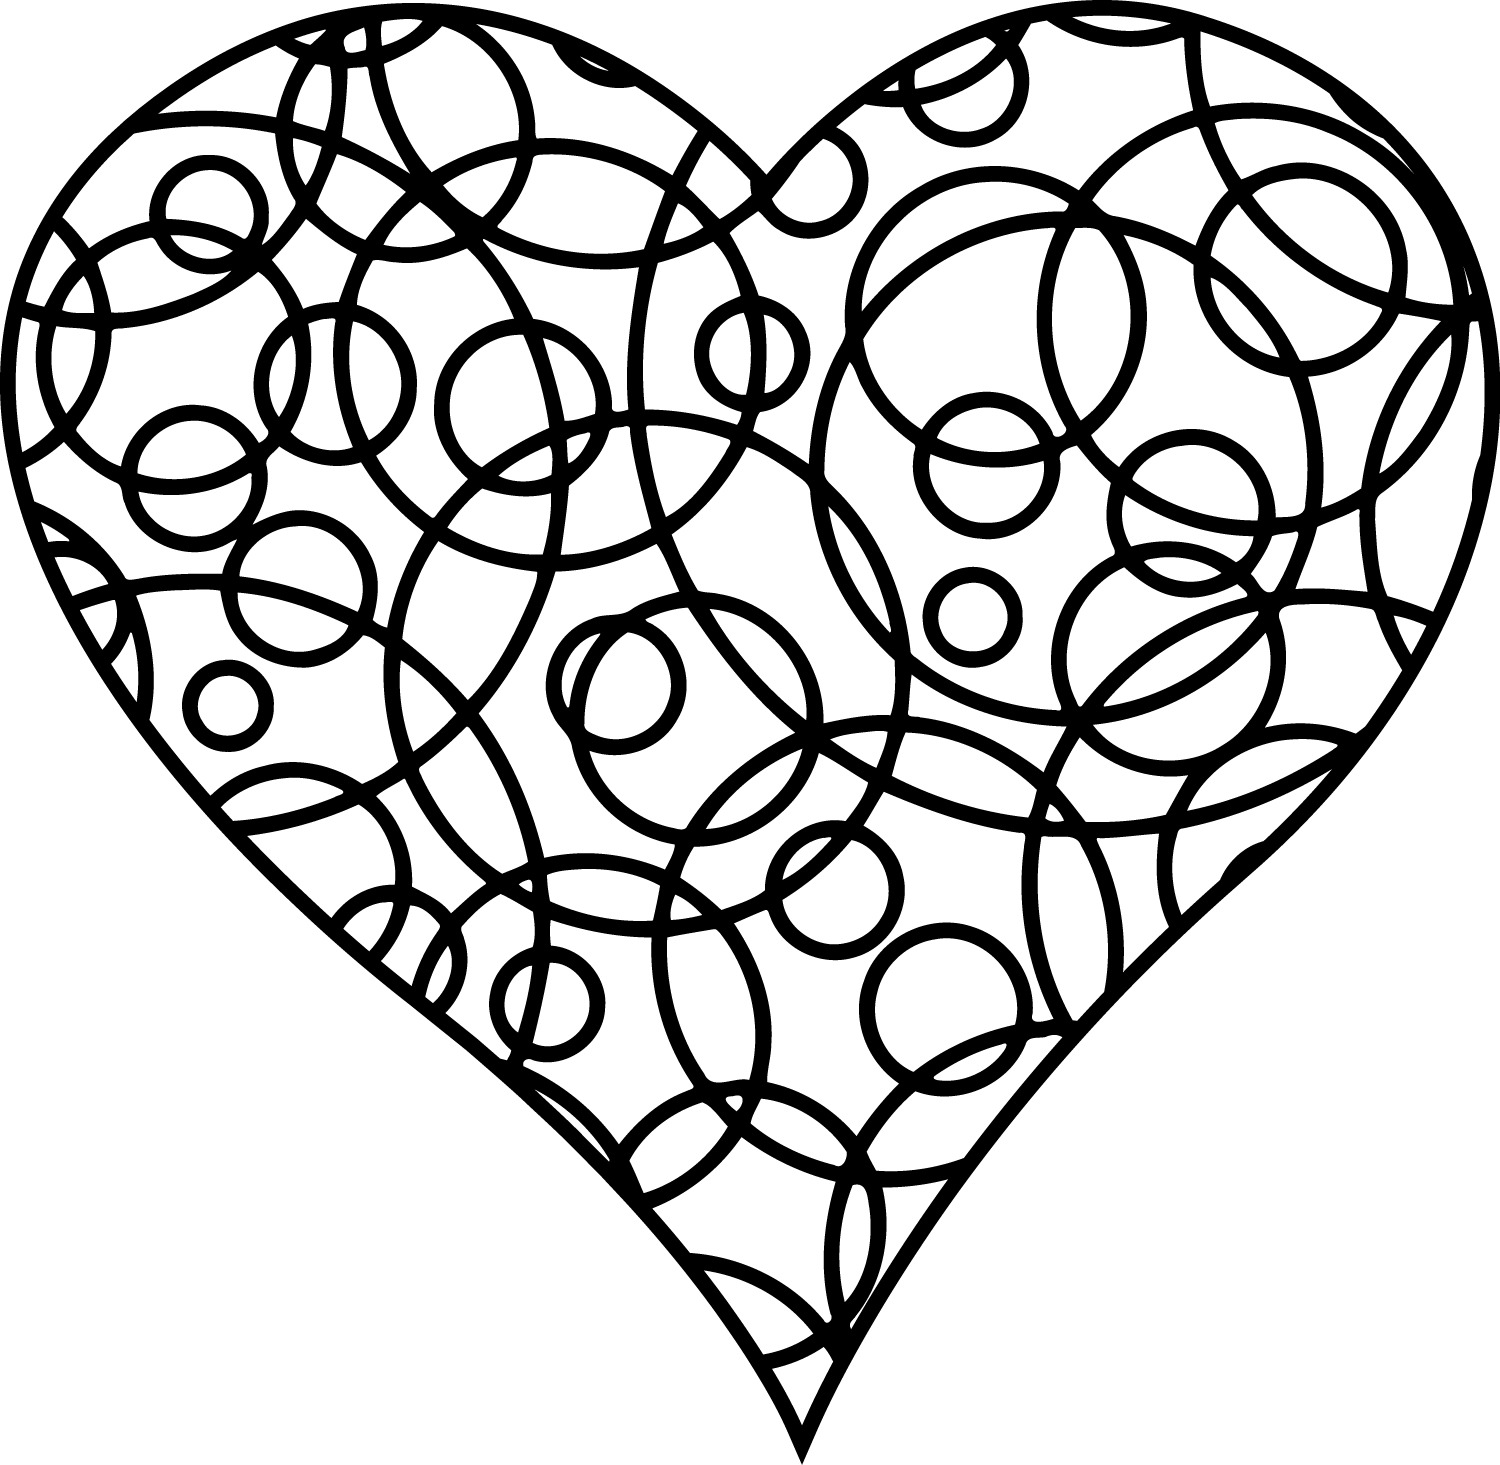 Patterned Heart Coloring Page